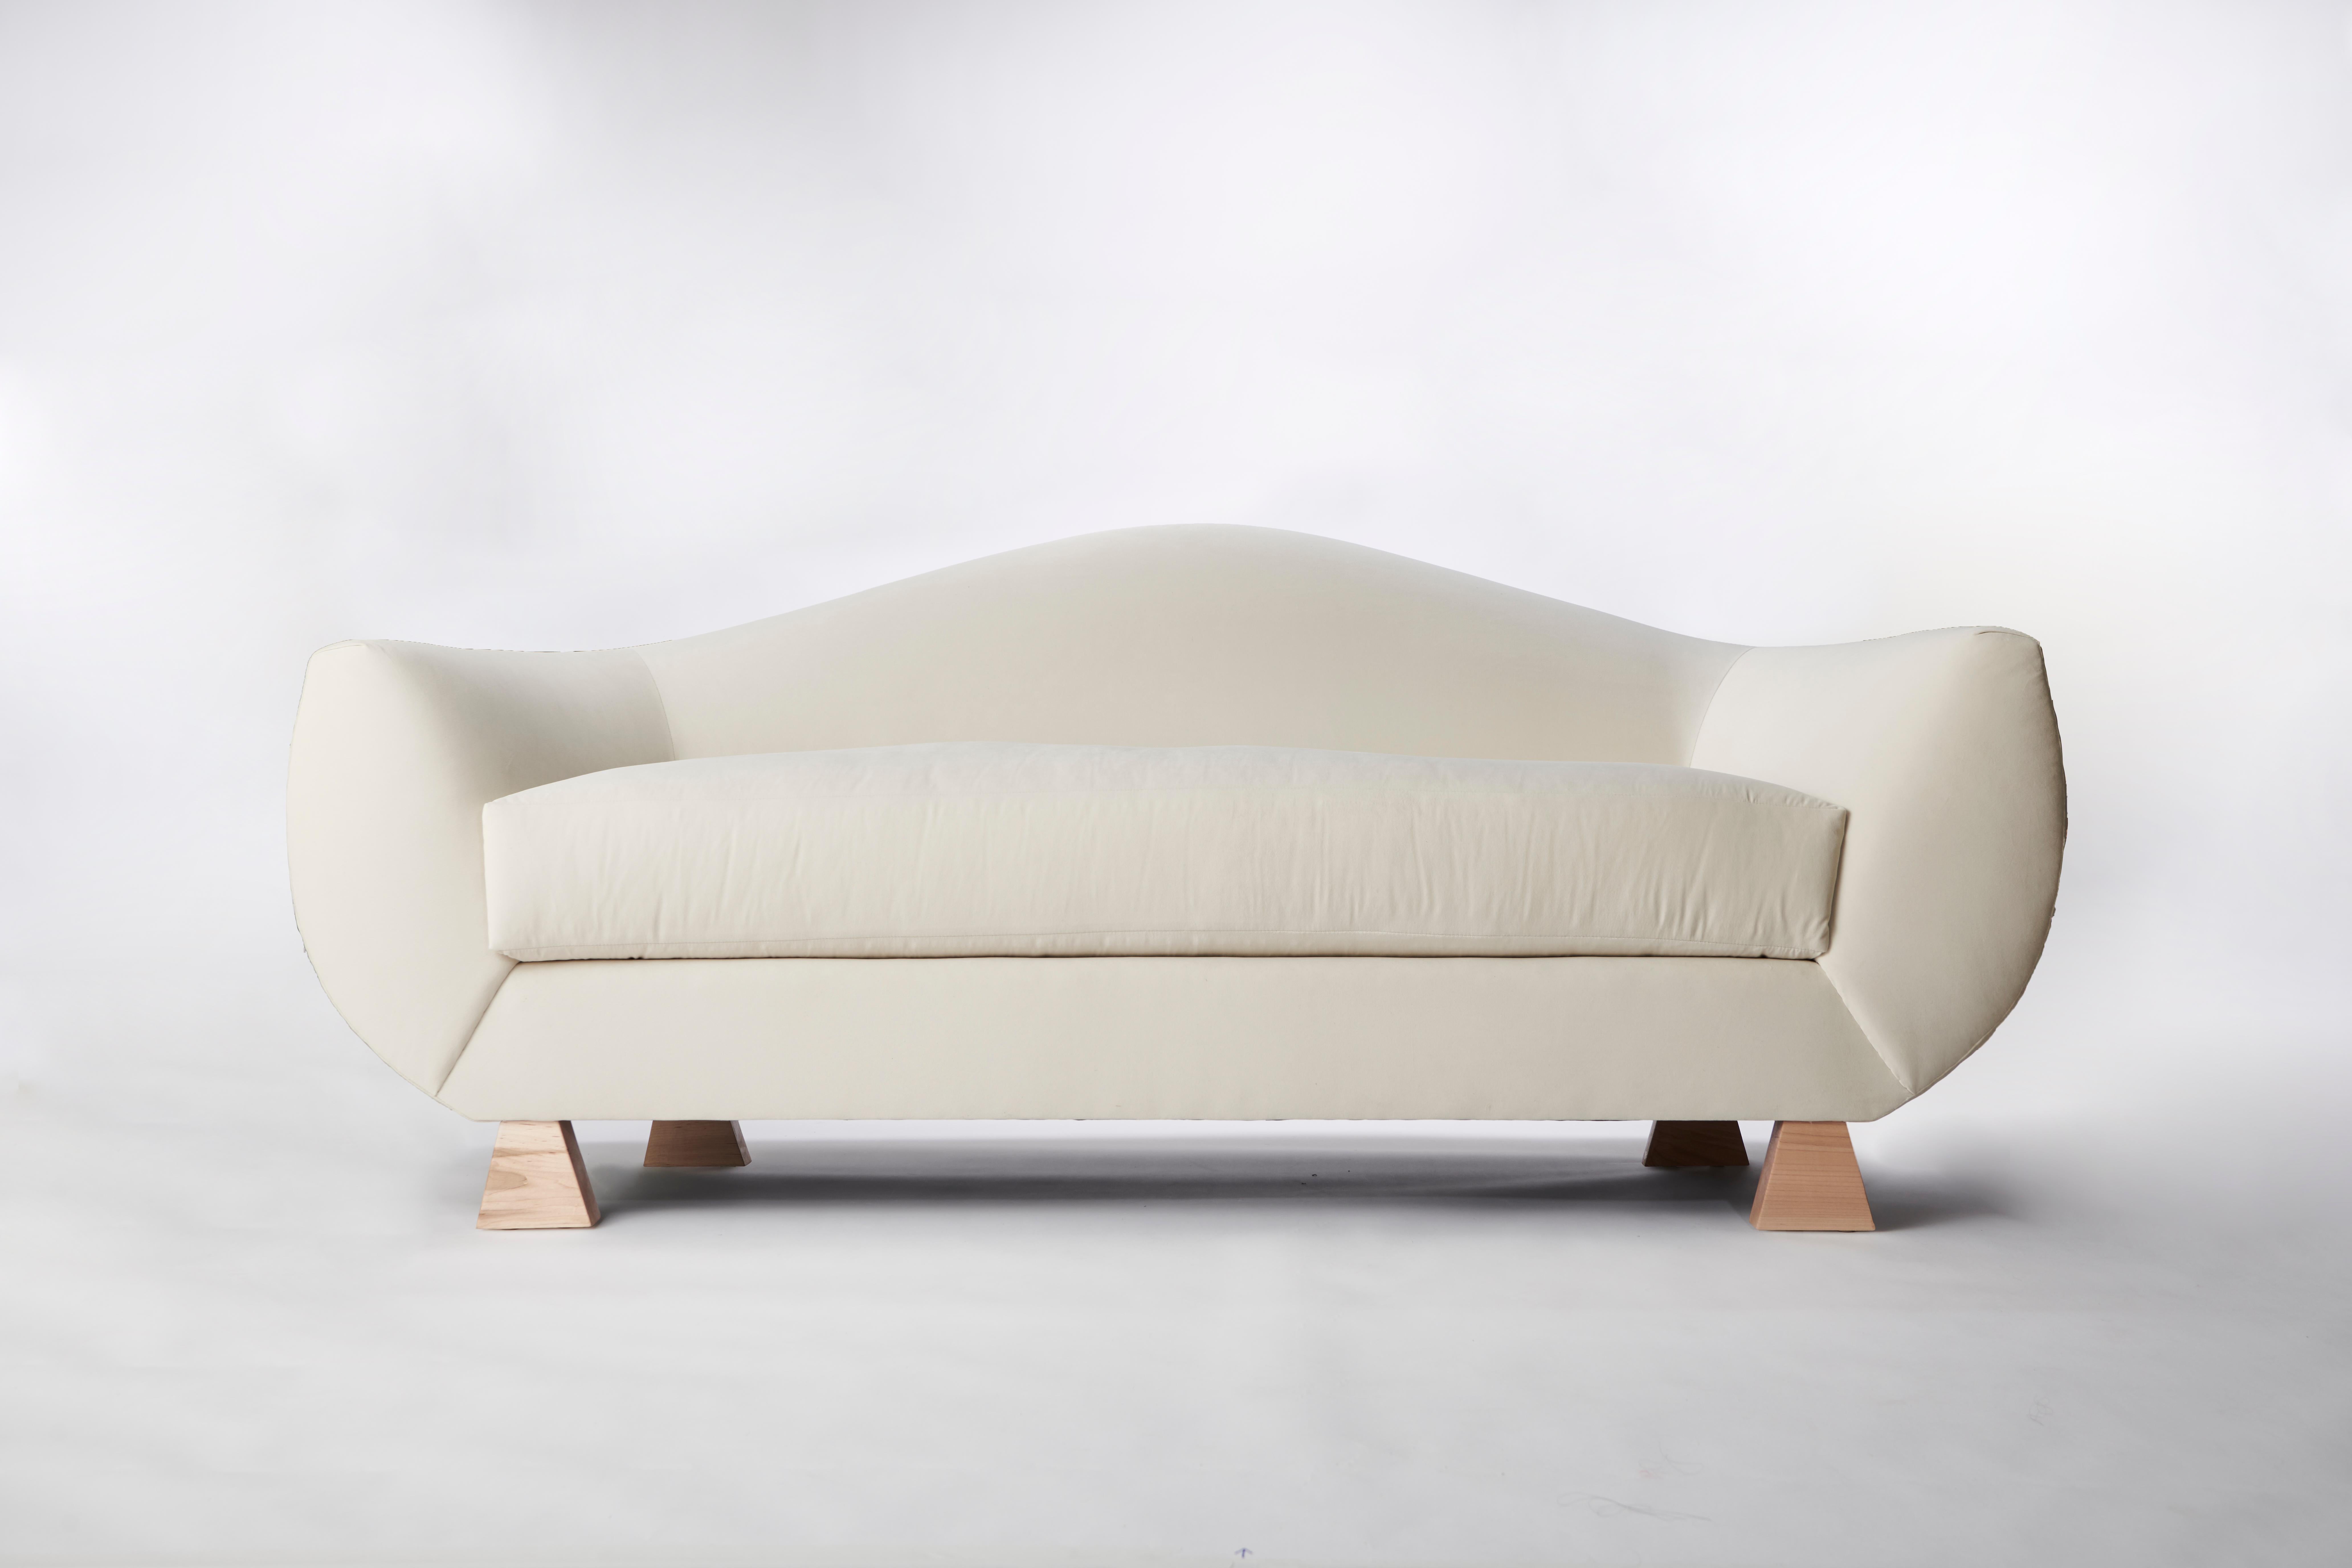 Made to order velvet and wood curved sofa designed by Christian Siriano.

Fabric: Ivory Velvet
Base: Natural Maple.
 
Available in custom fabrics and finishes.

Dimensions: 
Overall Width: 84”
Overall Depth: 32” 
Overall Height: 36.5”
Seat Height: